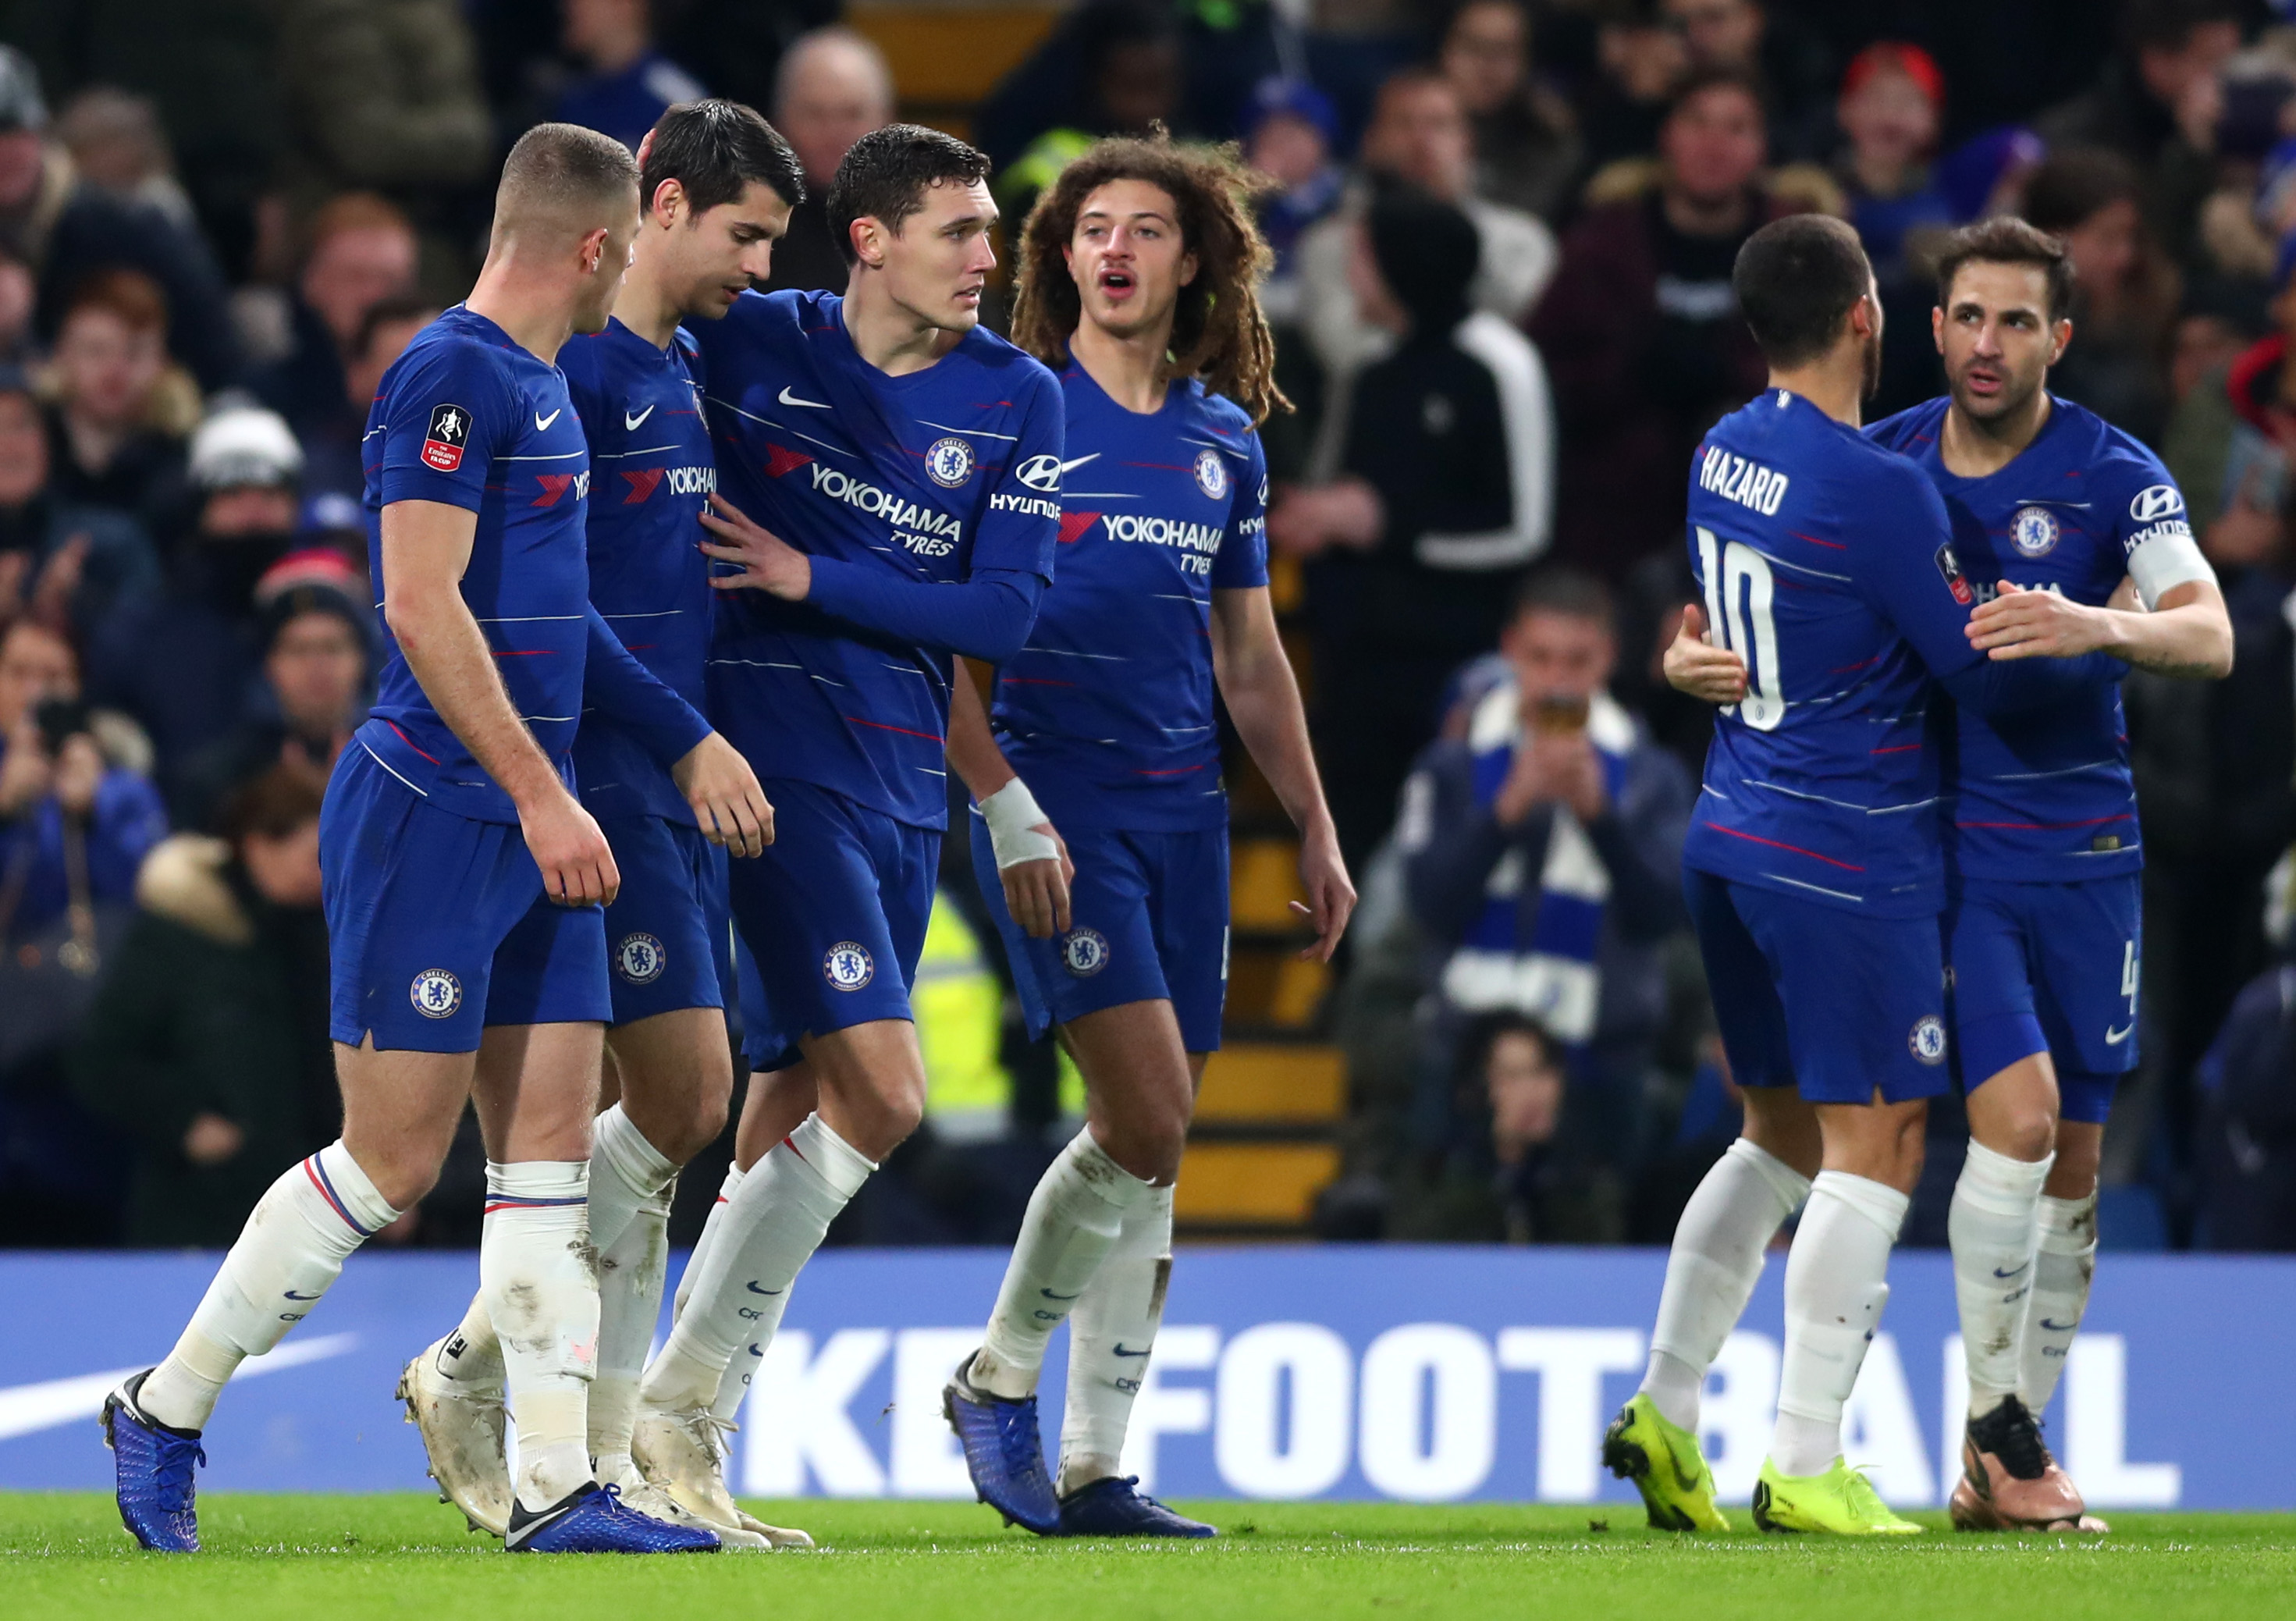 LONDON, ENGLAND - JANUARY 05:  Alvaro Morata of Chelsea celebrates with teammates after scoring his team's first goal during the FA Cup Third Round match between Chelsea and Nottingham Forest at Stamford Bridge on January 5, 2019 in London, United Kingdom.  (Photo by Clive Rose/Getty Images)